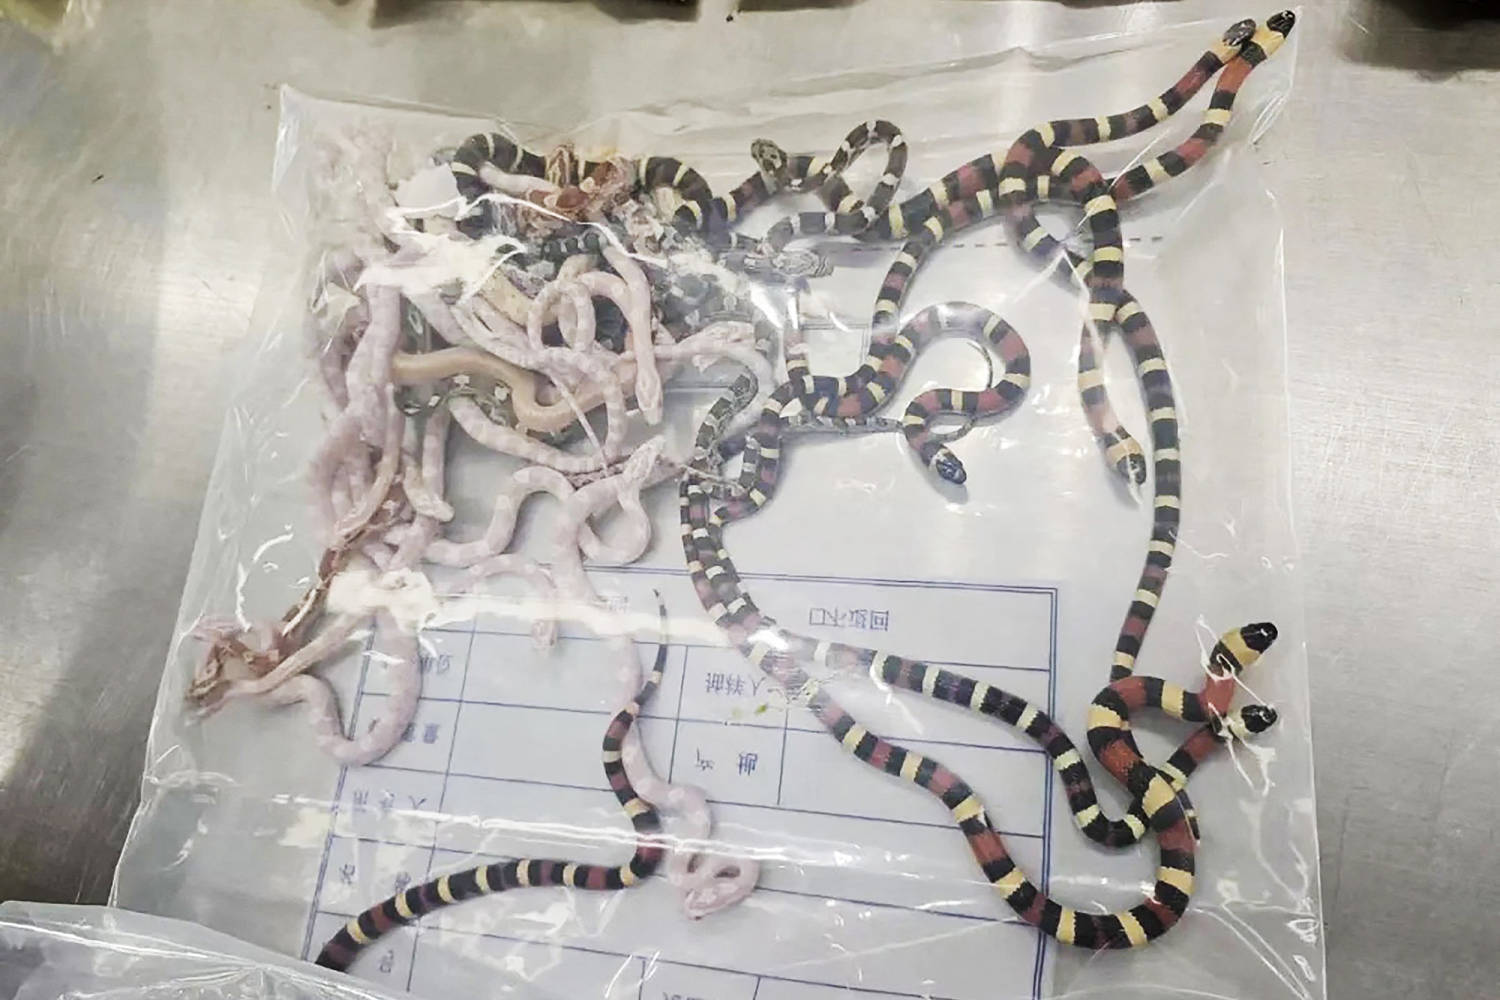 Smuggler is caught with 104 snakes in his pants at the Chinese border